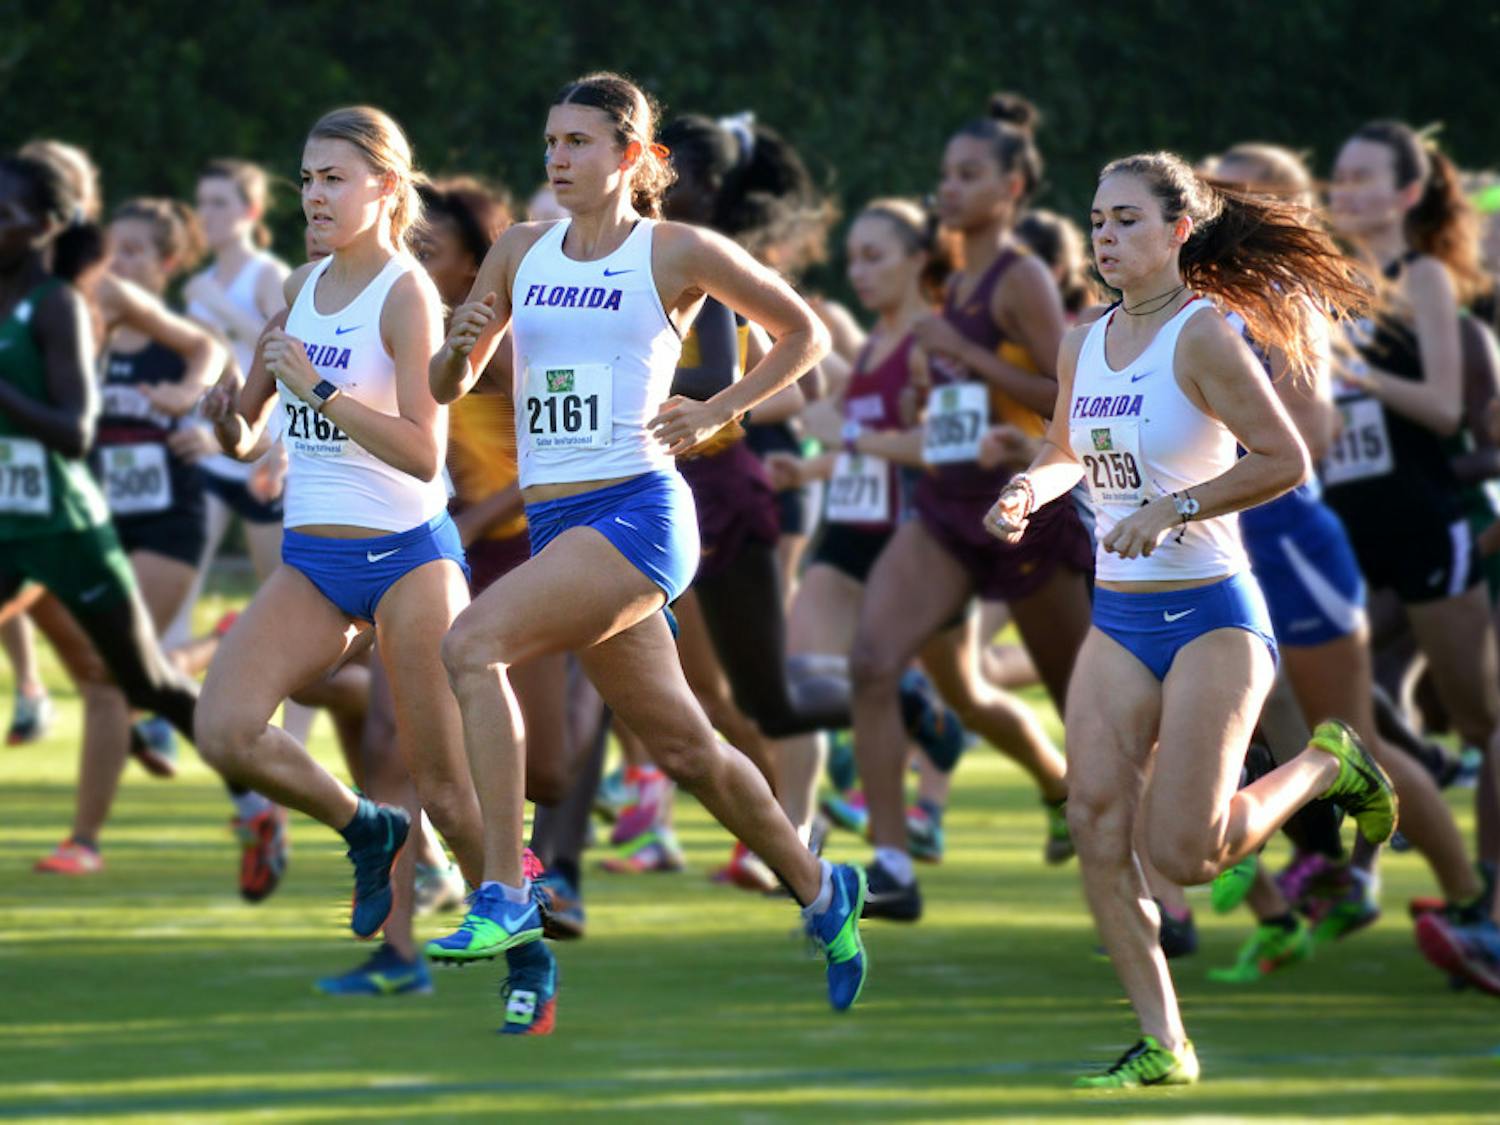 Junior Jessica Pascoe (middle) led the Gator women to a second-place finish at the NCAA South Regional in Tallahassee, Florida, with the second-fastest overall time in the women's 6k. 